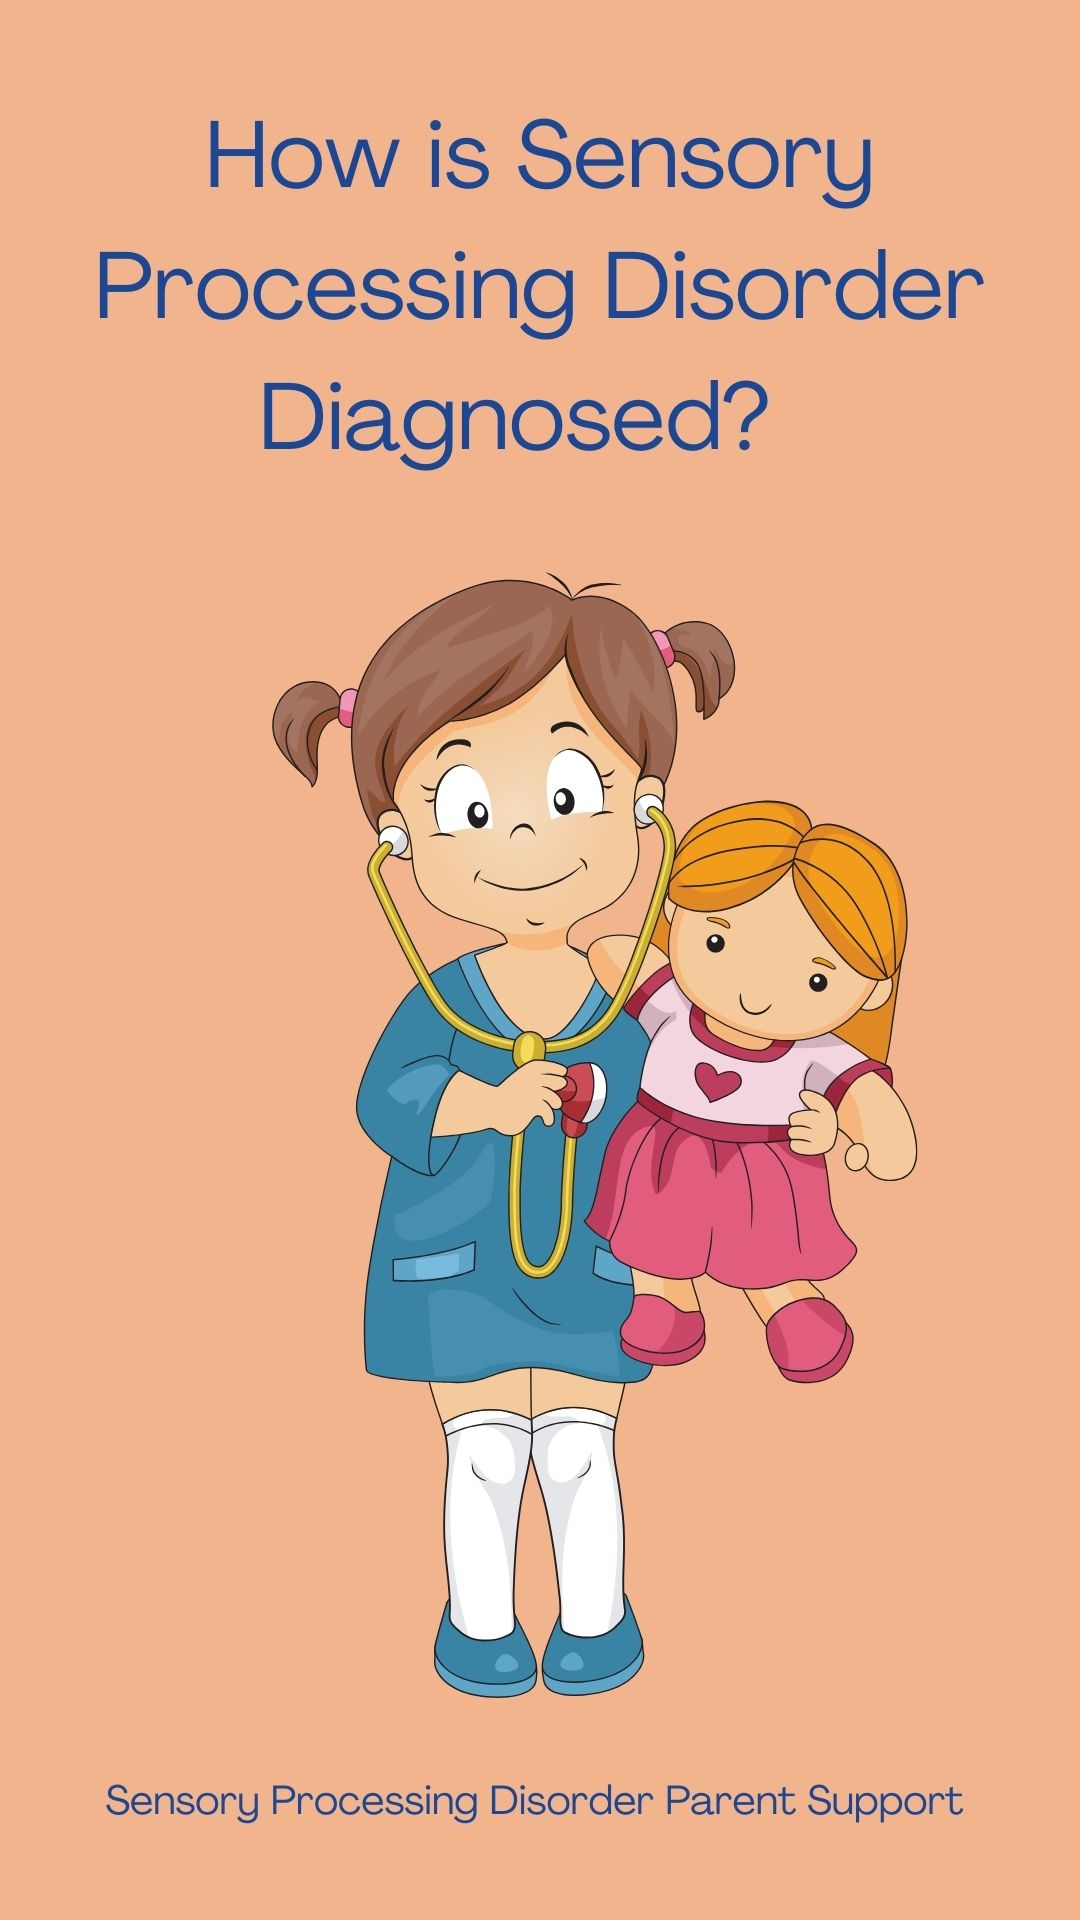 How is Sensory Processing Disorder Diagnosed?